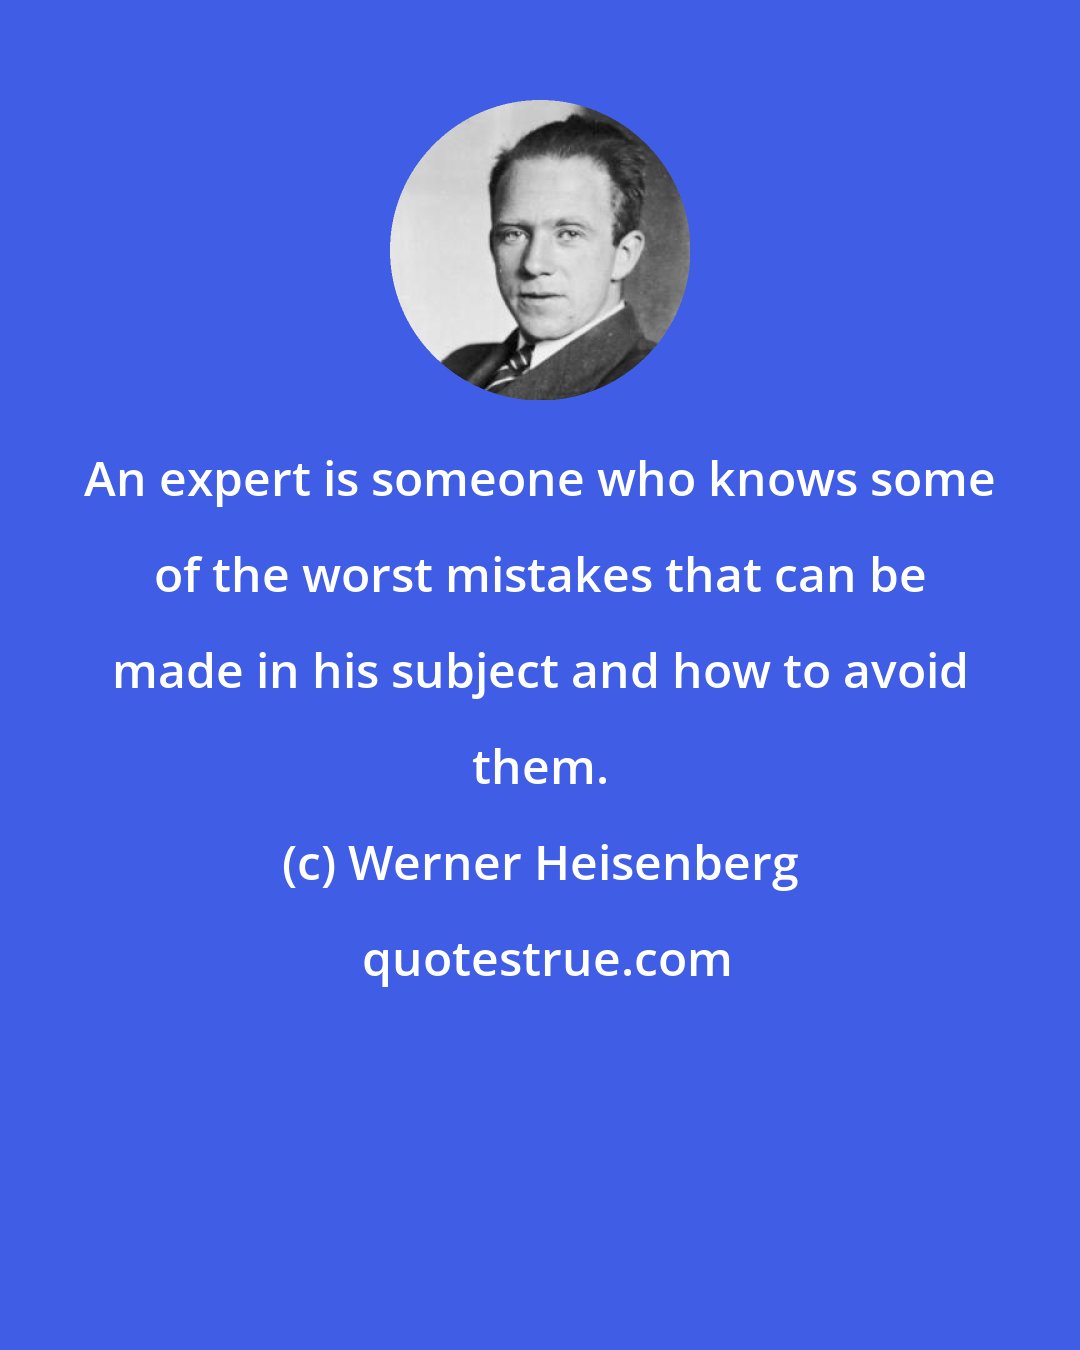 Werner Heisenberg: An expert is someone who knows some of the worst mistakes that can be made in his subject and how to avoid them.